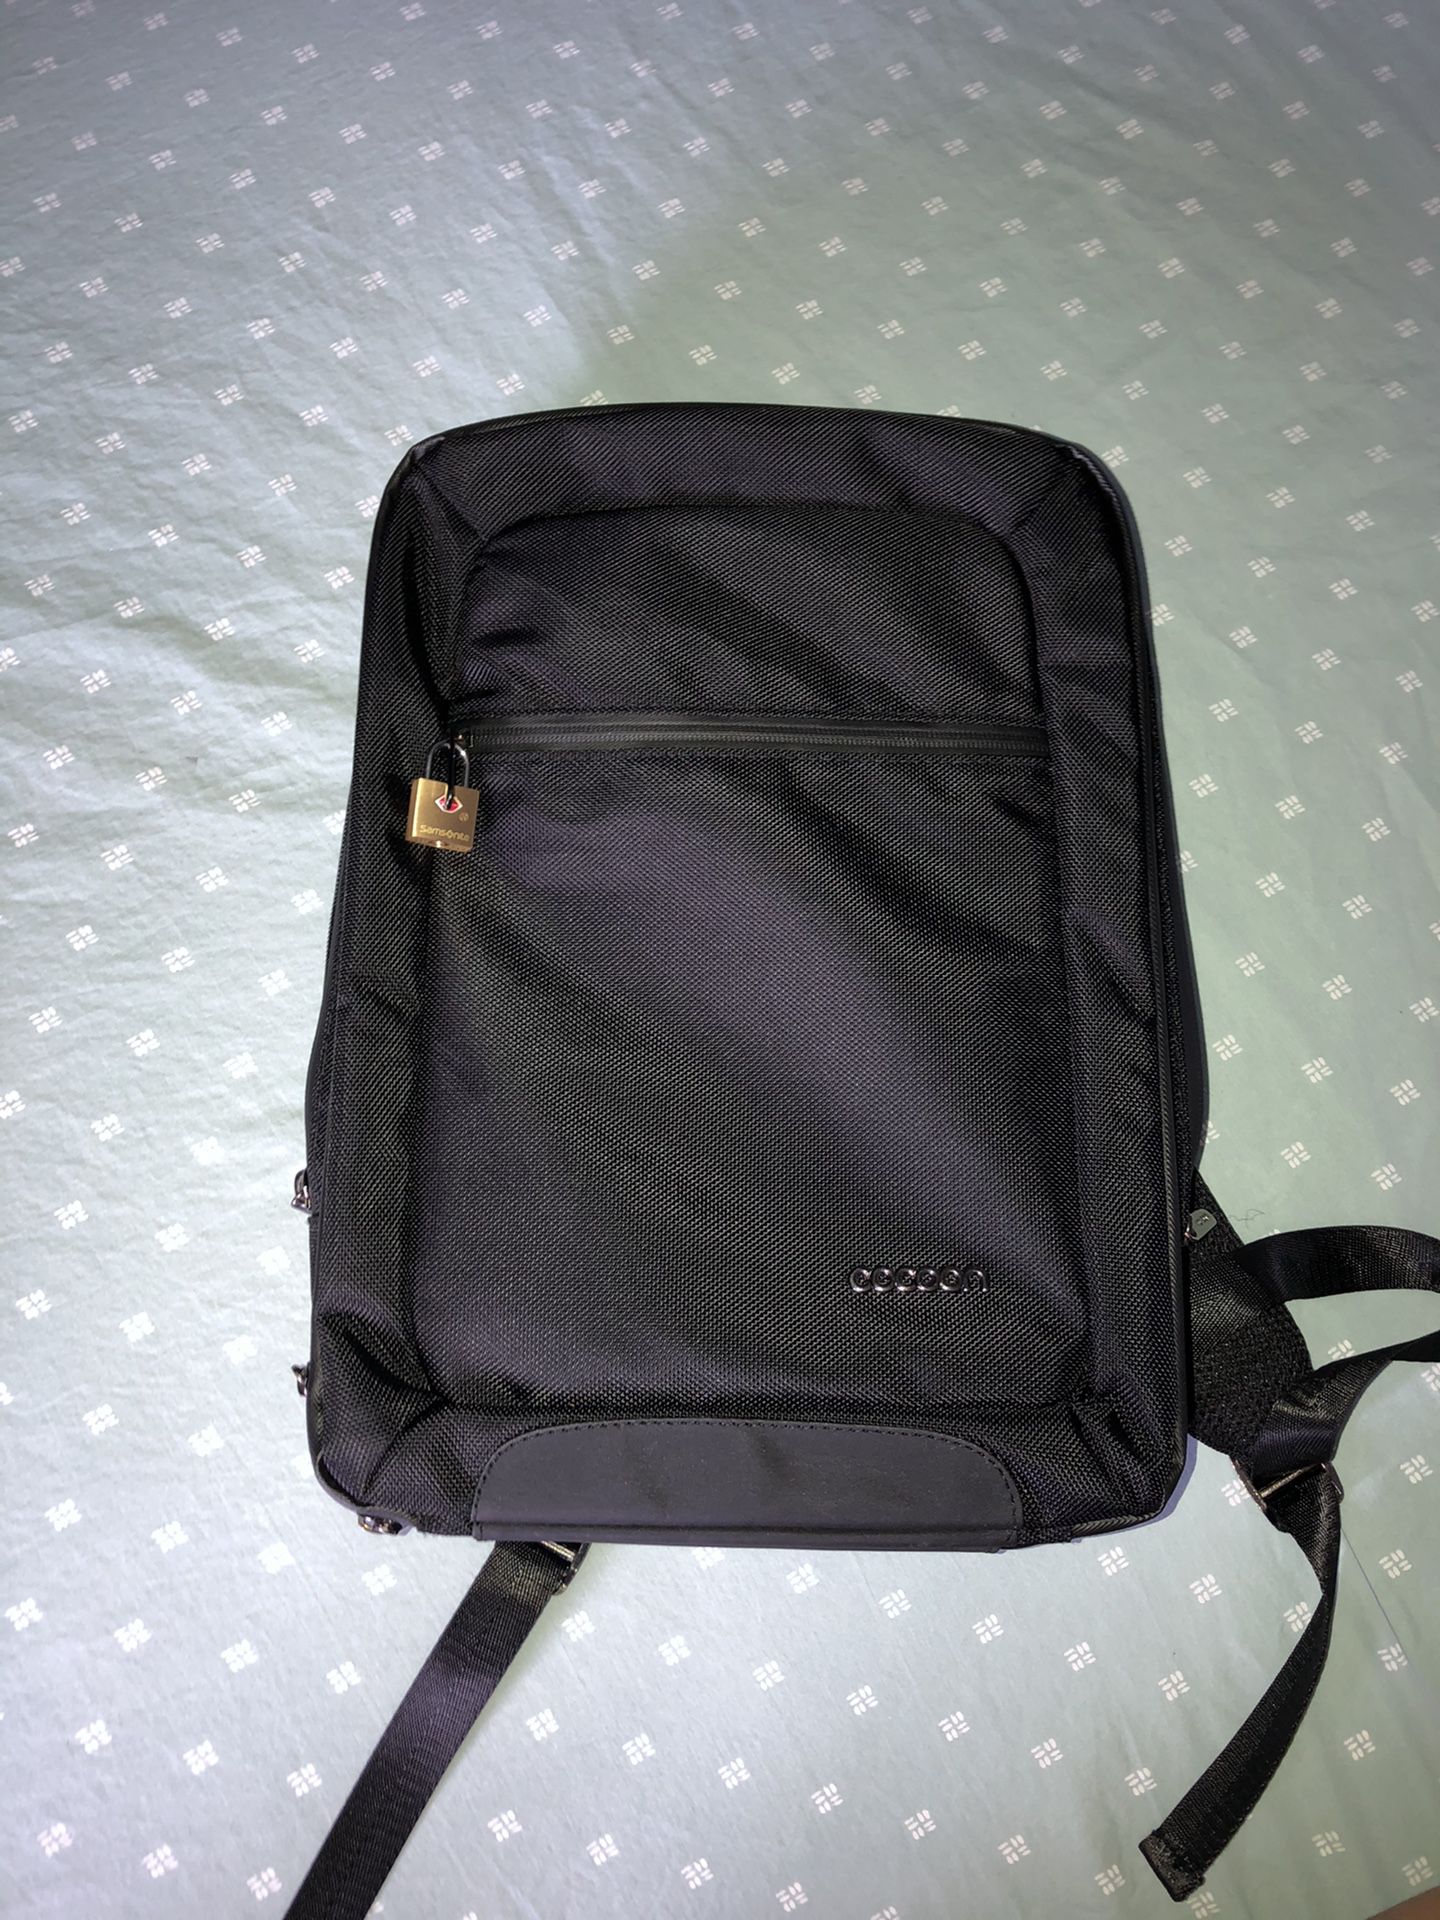 Cocoon laptop backpack